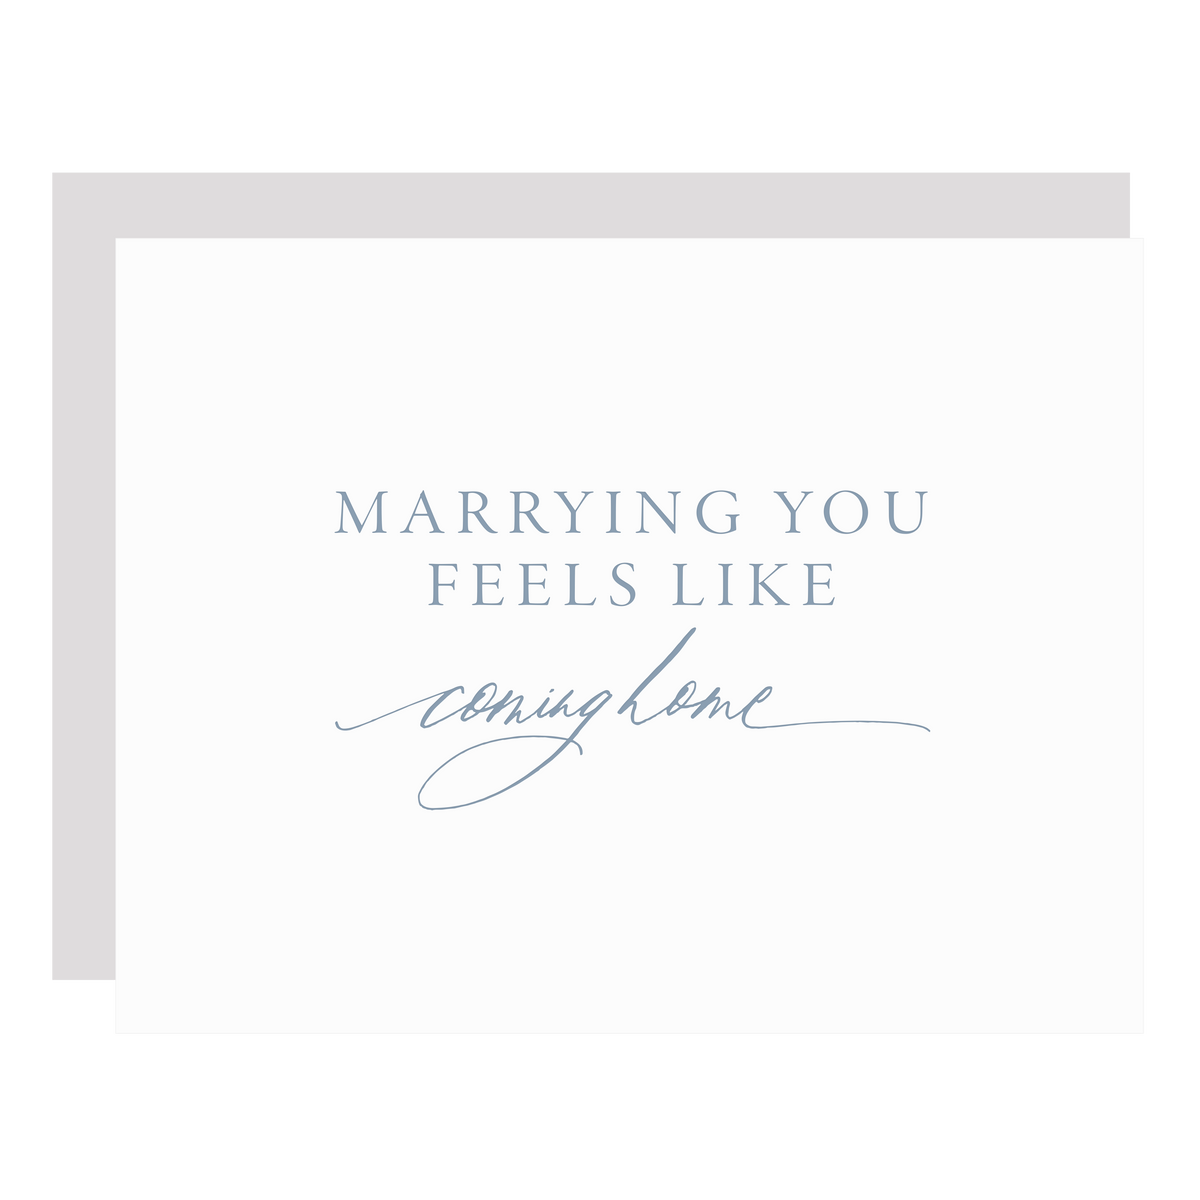 &quot;Marrying You Feels Like Coming Home&quot; card, letterpress printed by hand in dusty blue ink.